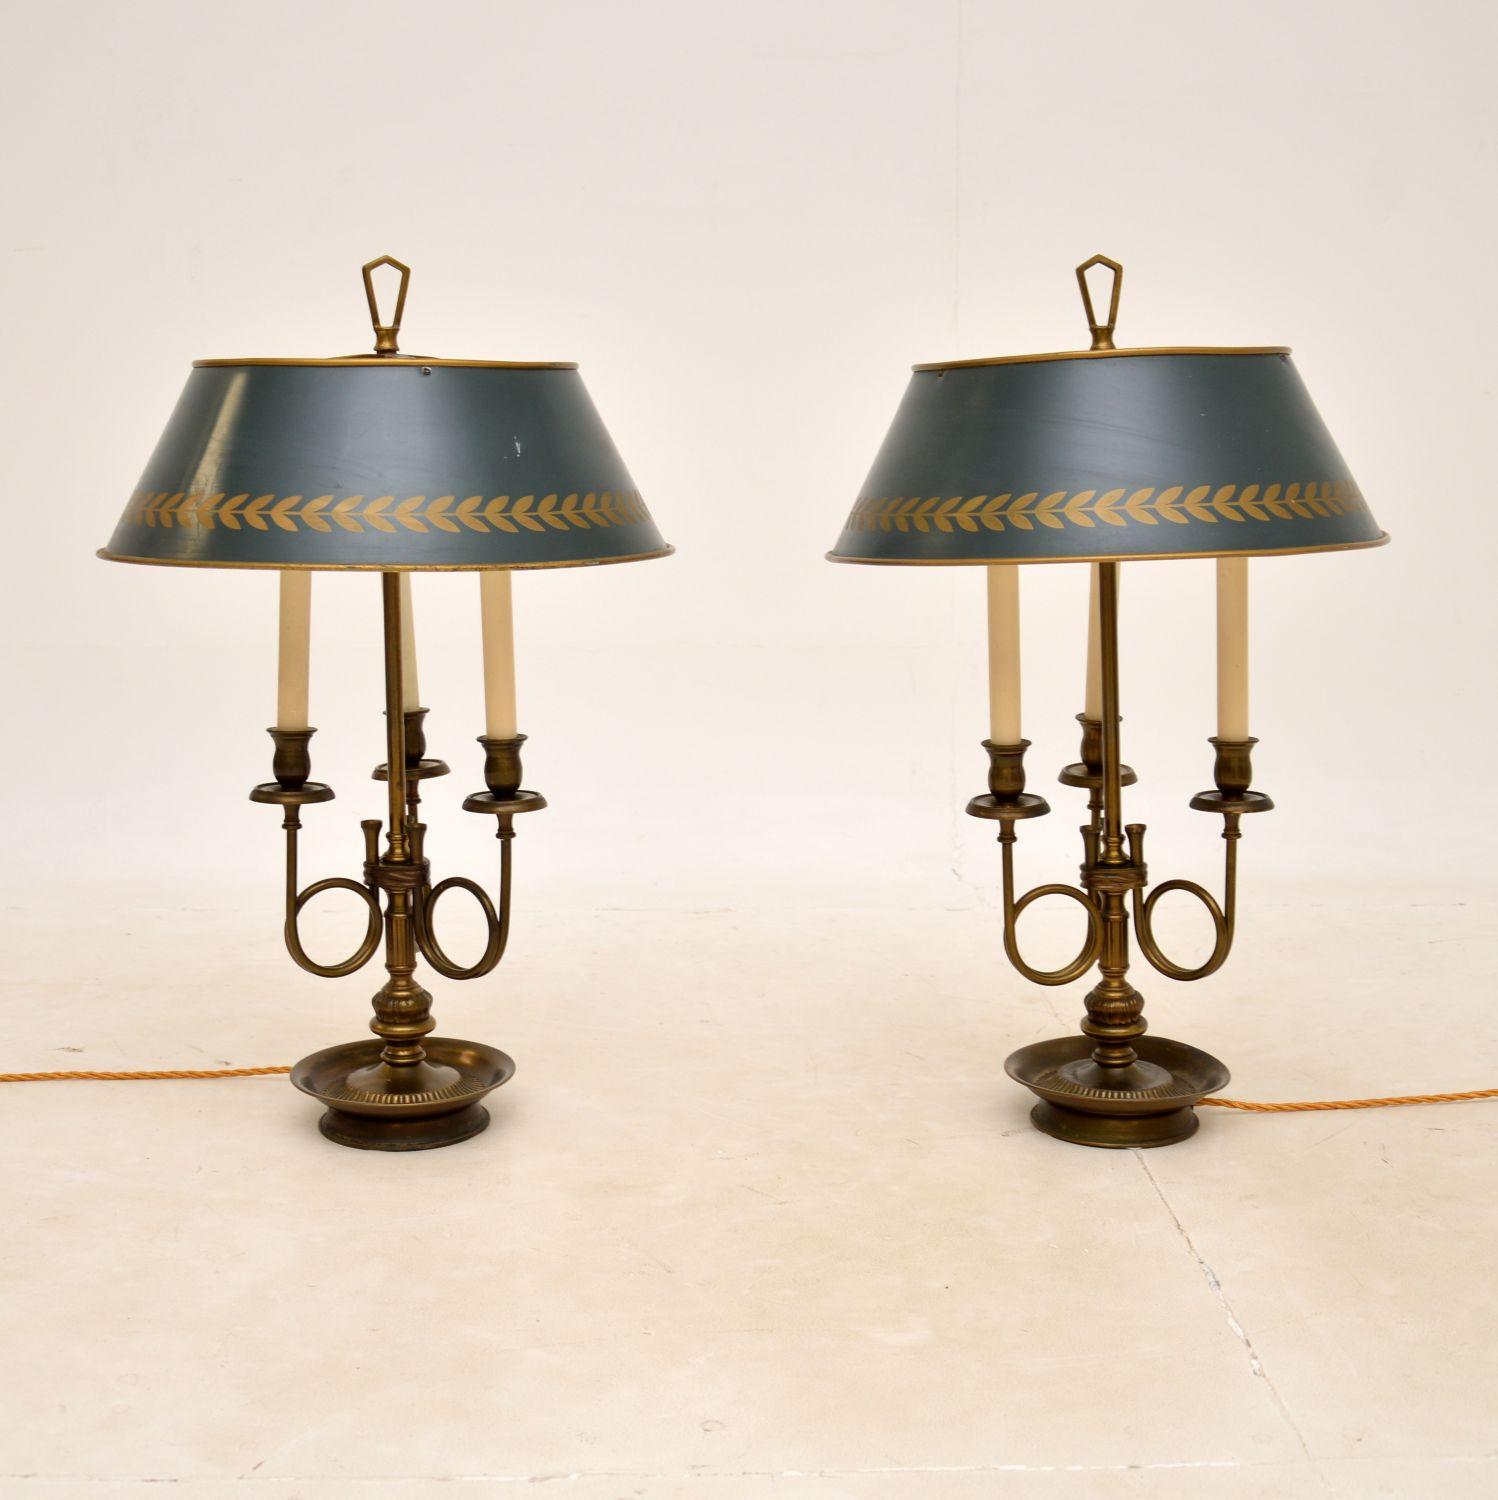 A superb pair of antique table lamps in solid brass, with fantastic tole shades. They were made in England, and date from around the 1930’s.

The quality is outstanding, they have a gorgeous design and the brass has acquired a gorgeous, deep